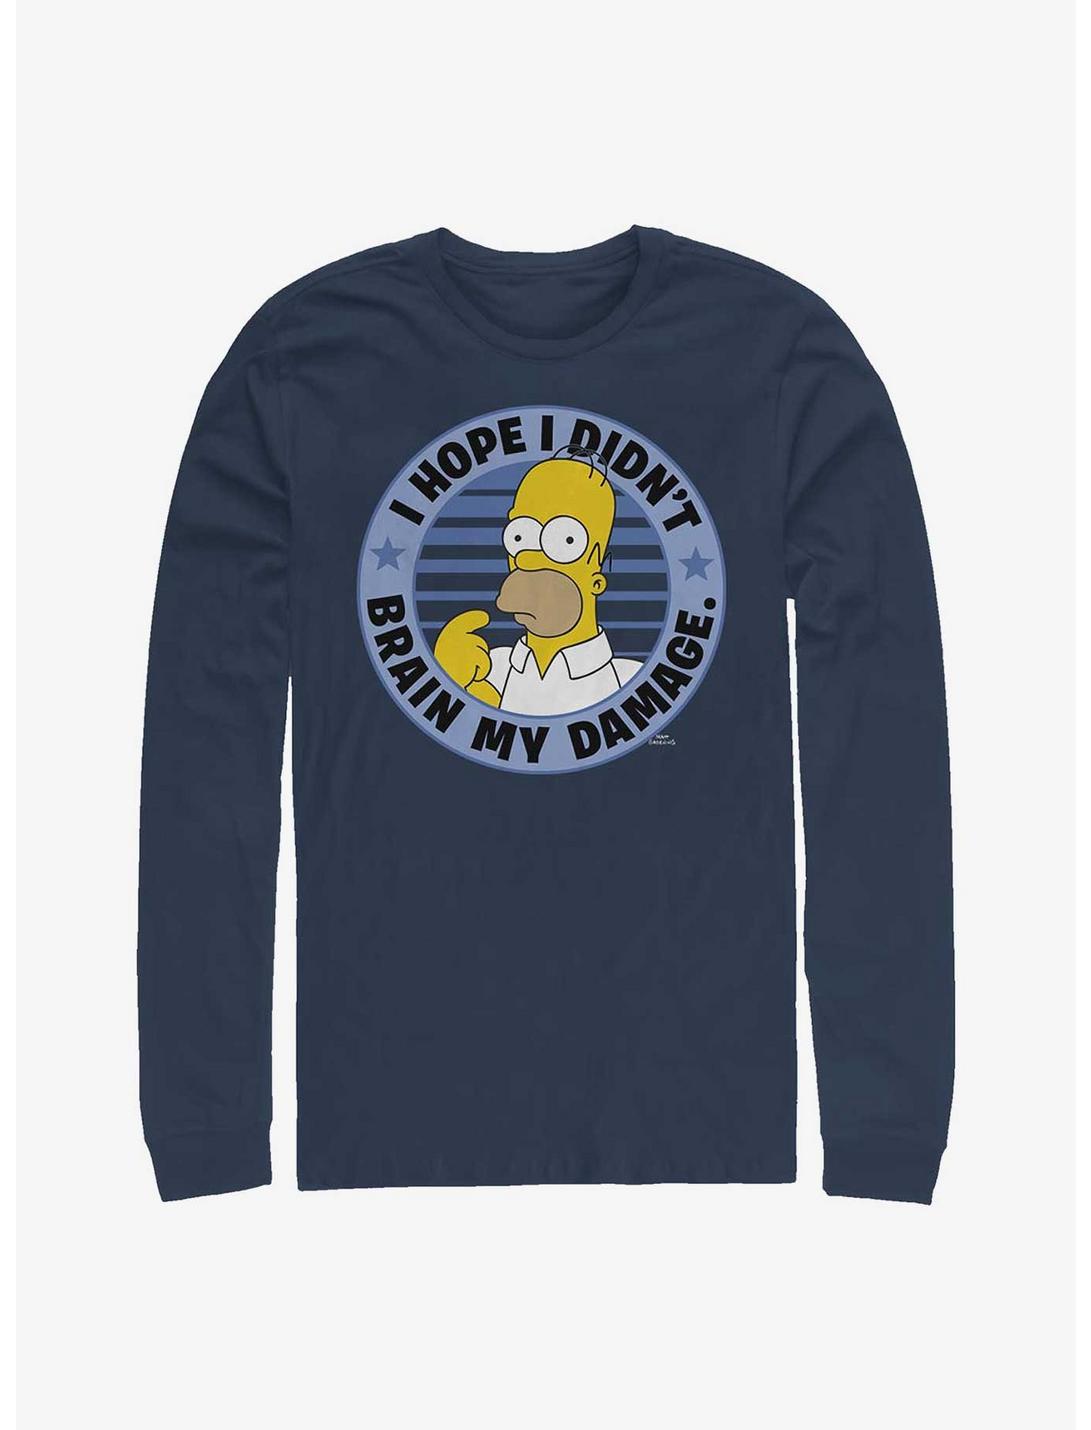 Plus Size The Simpsons Homer Brain My Damage Long-Sleeve T-Shirt, NAVY, hi-res